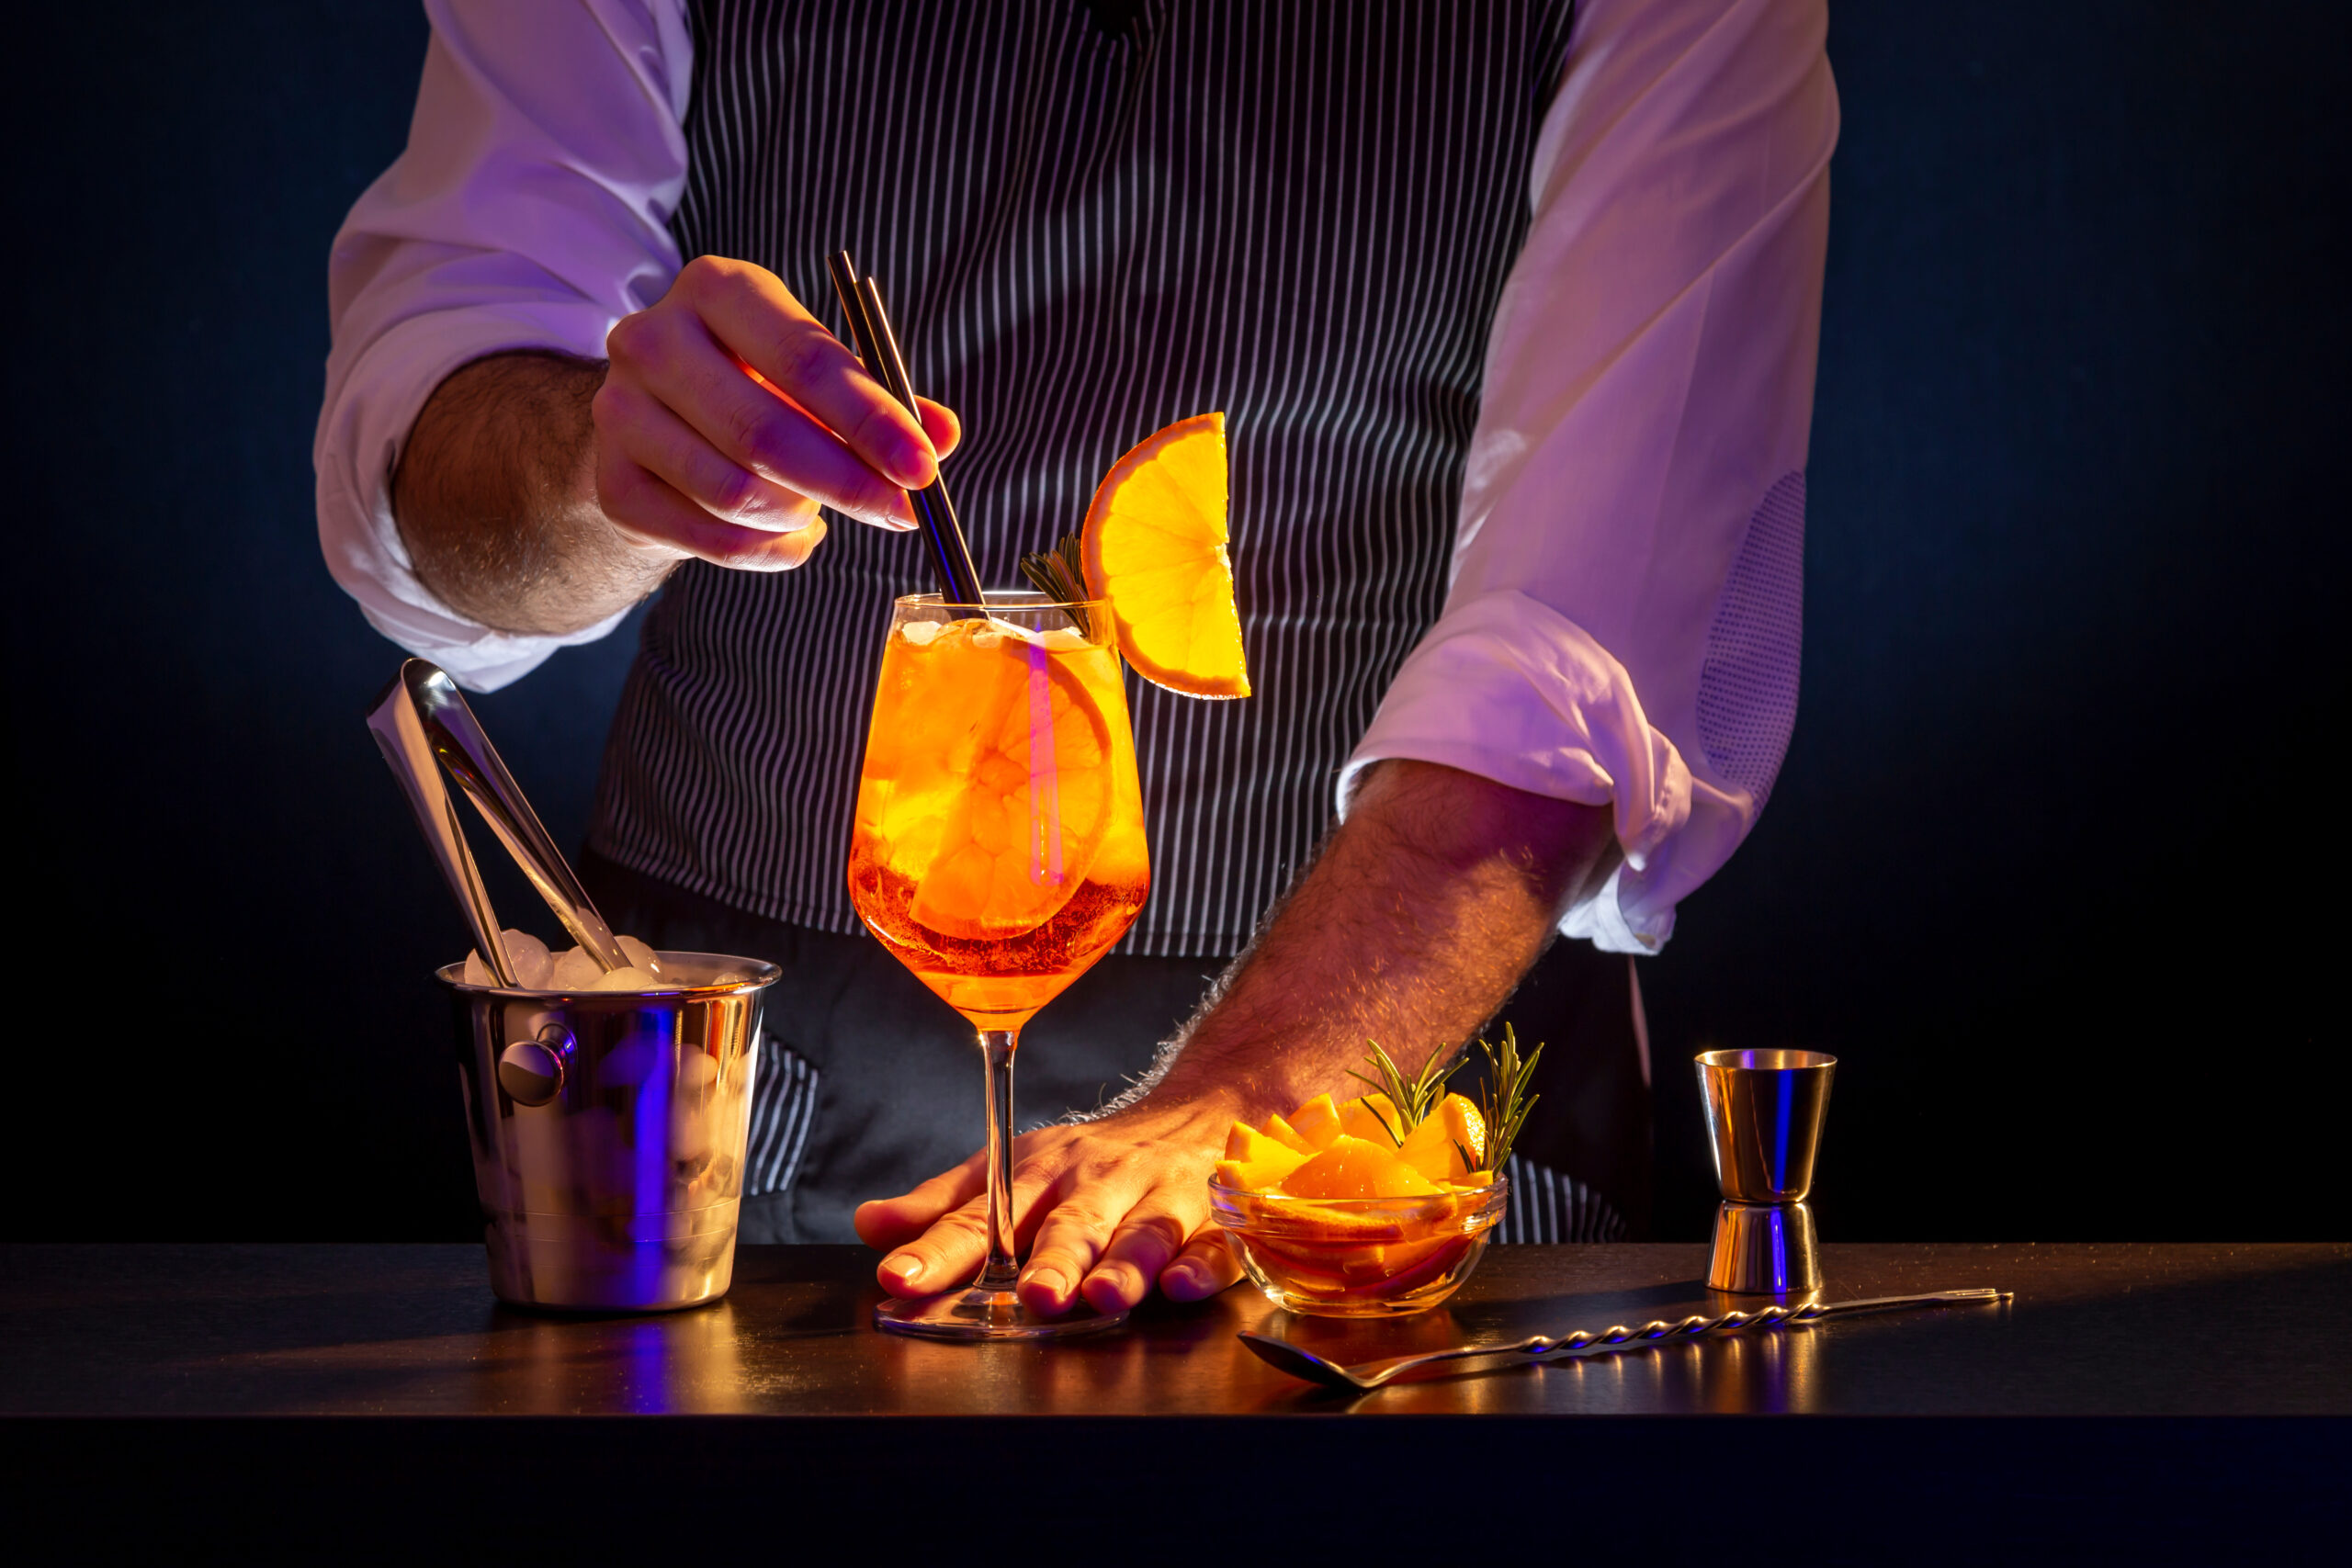 Bartender adding compostable drinking straws into Aperol spritz cocktail glass; barman serving orange liqueur cocktail in a wineglass on a bar counter.